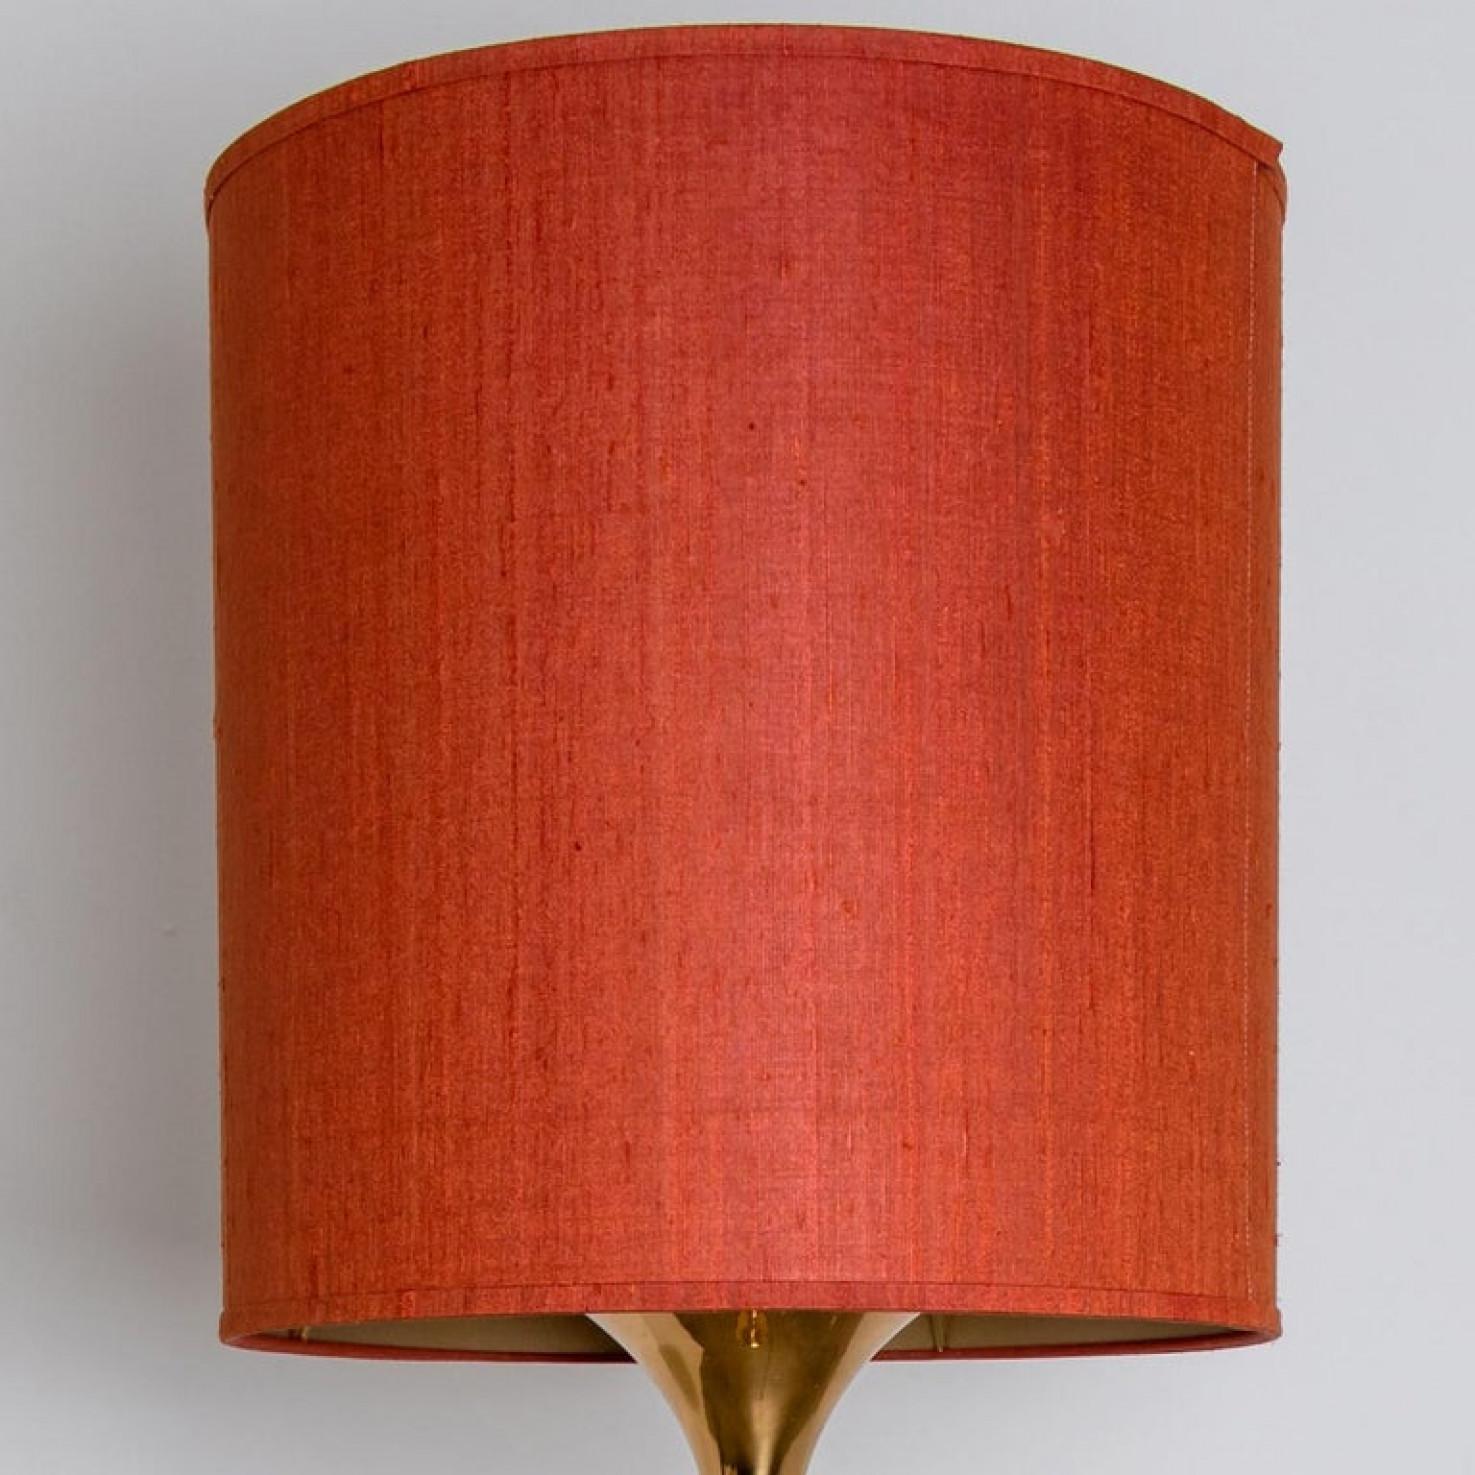 Other Pair of Table and Floor Lamp Designed by Ingo Maurer, 1968 For Sale